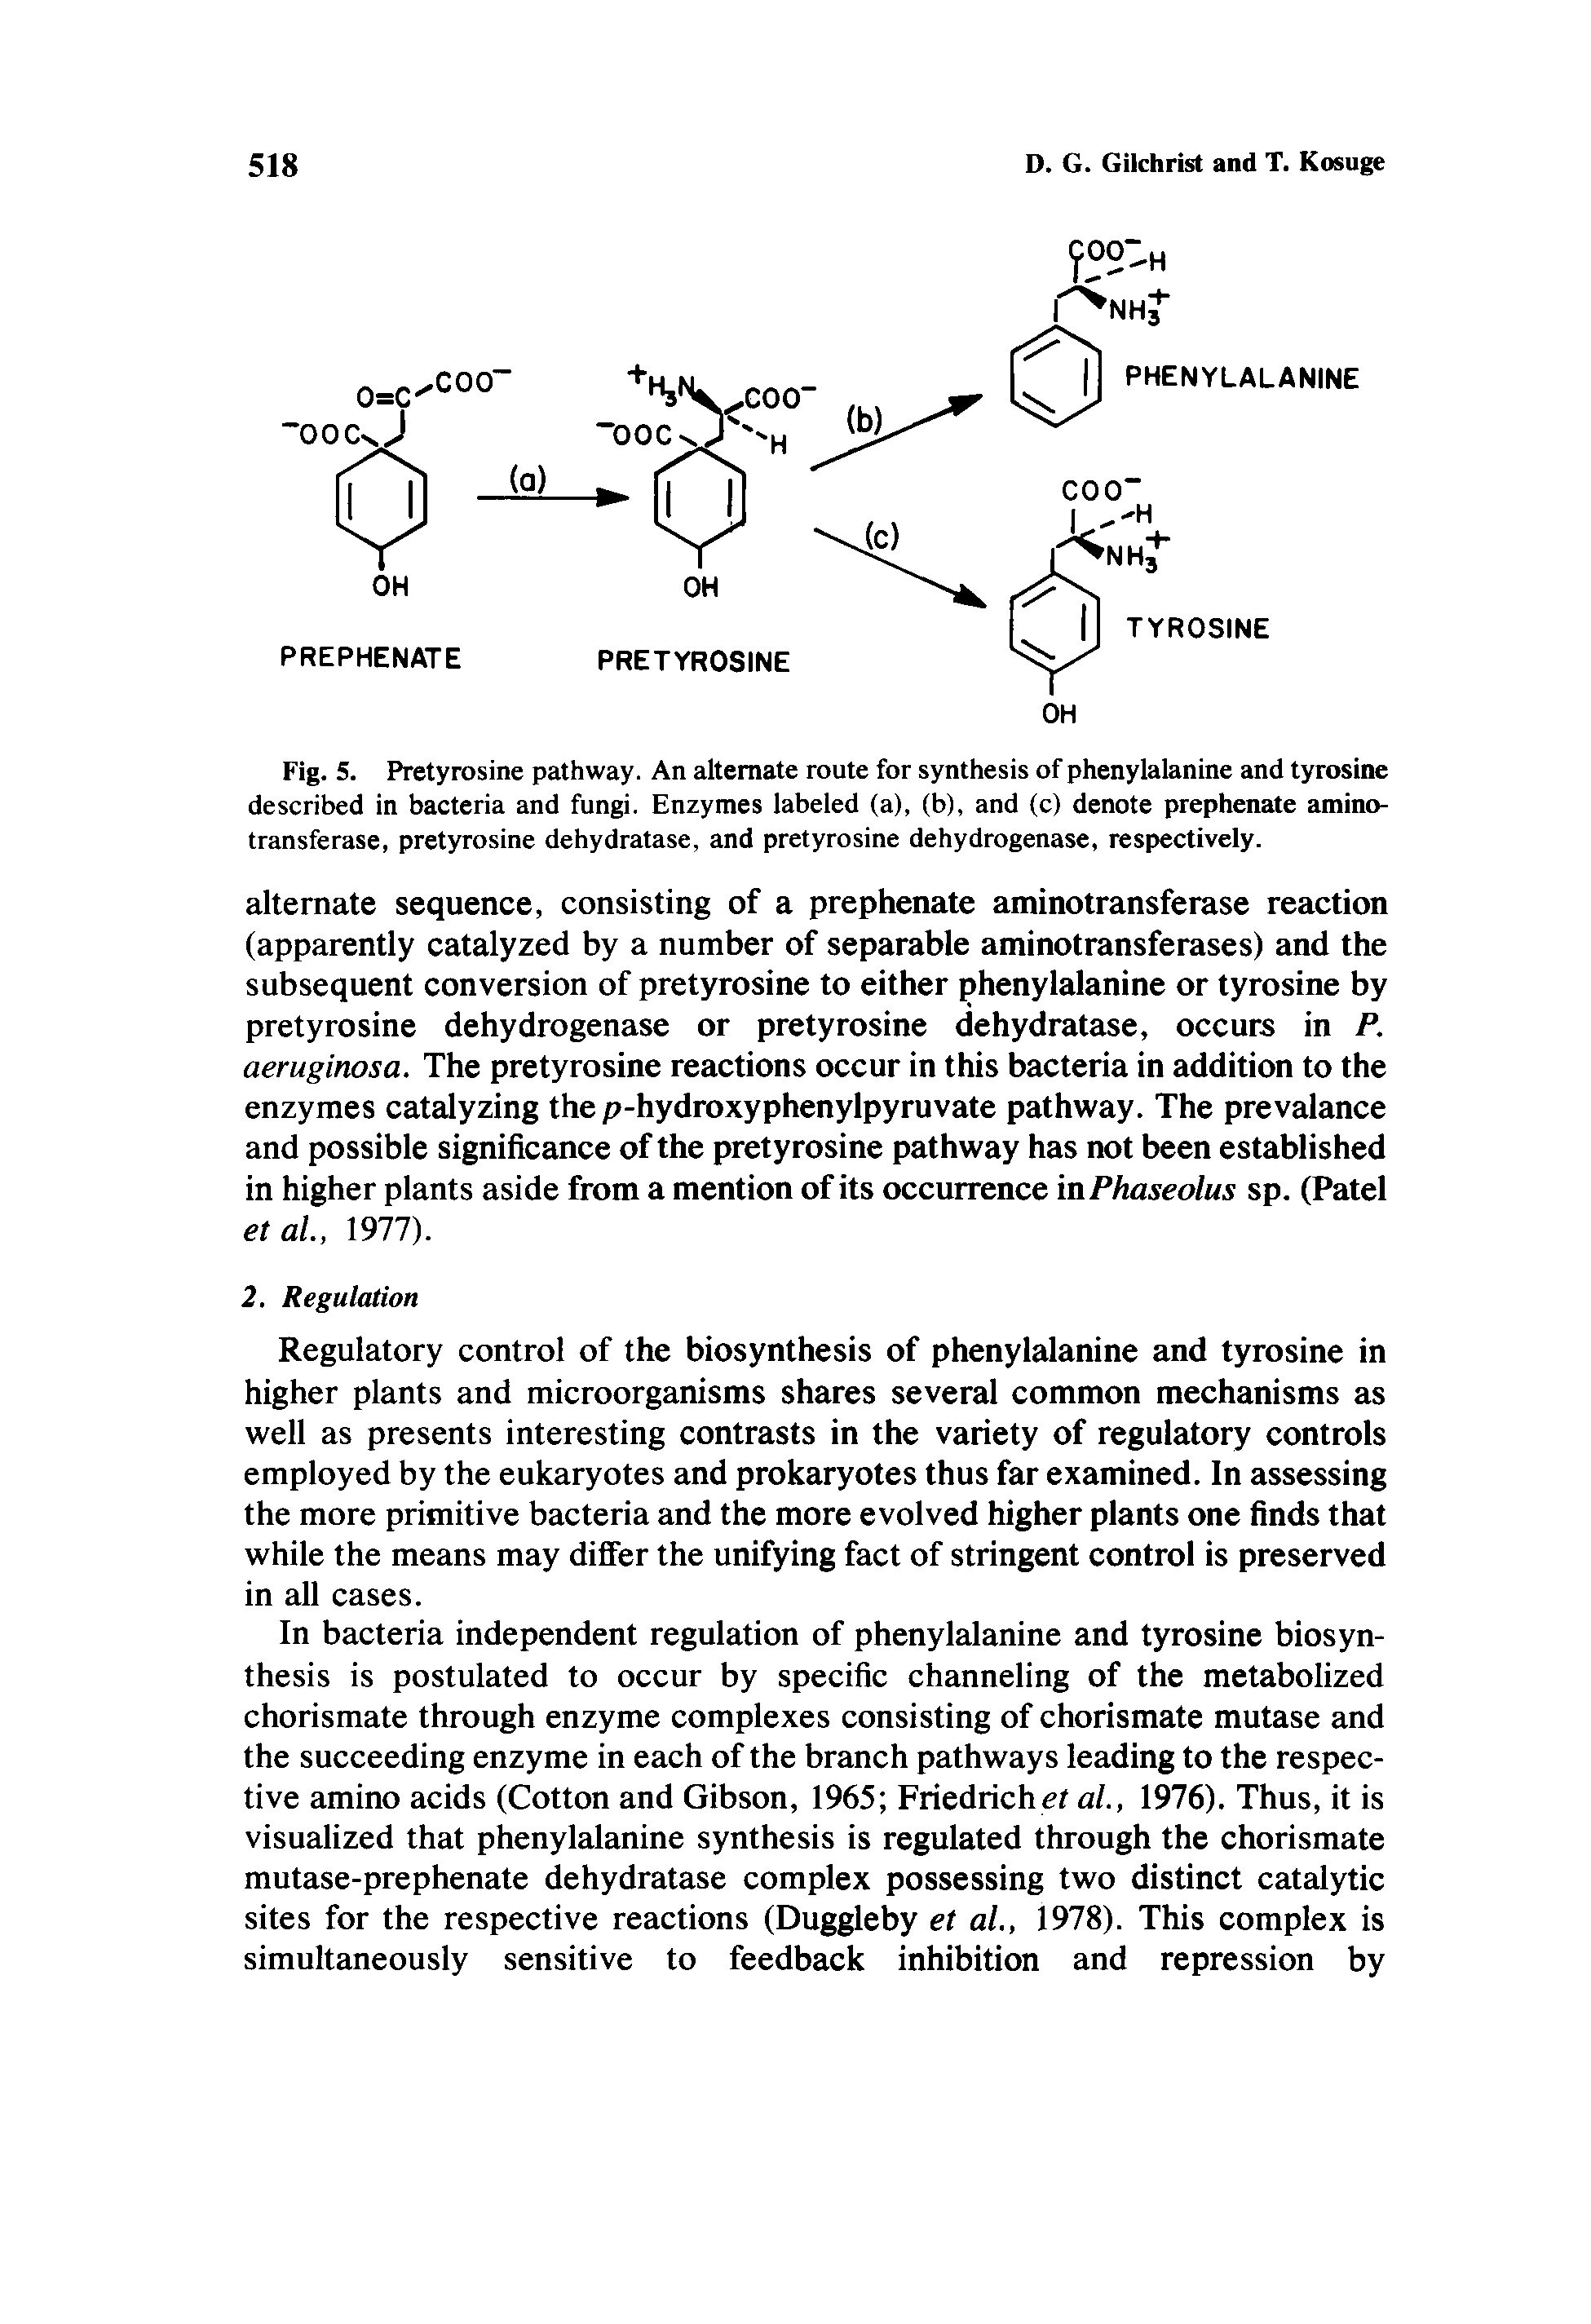 Fig. 5. Pretyrosine pathway. An alternate route for synthesis of phenylalanine and tyrosine described in bacteria and fungi. Enzymes labeled (a), (b), and (c) denote prephenate aminotransferase, pretyrosine dehydratase, and pretyrosine dehydrogenase, respectively.